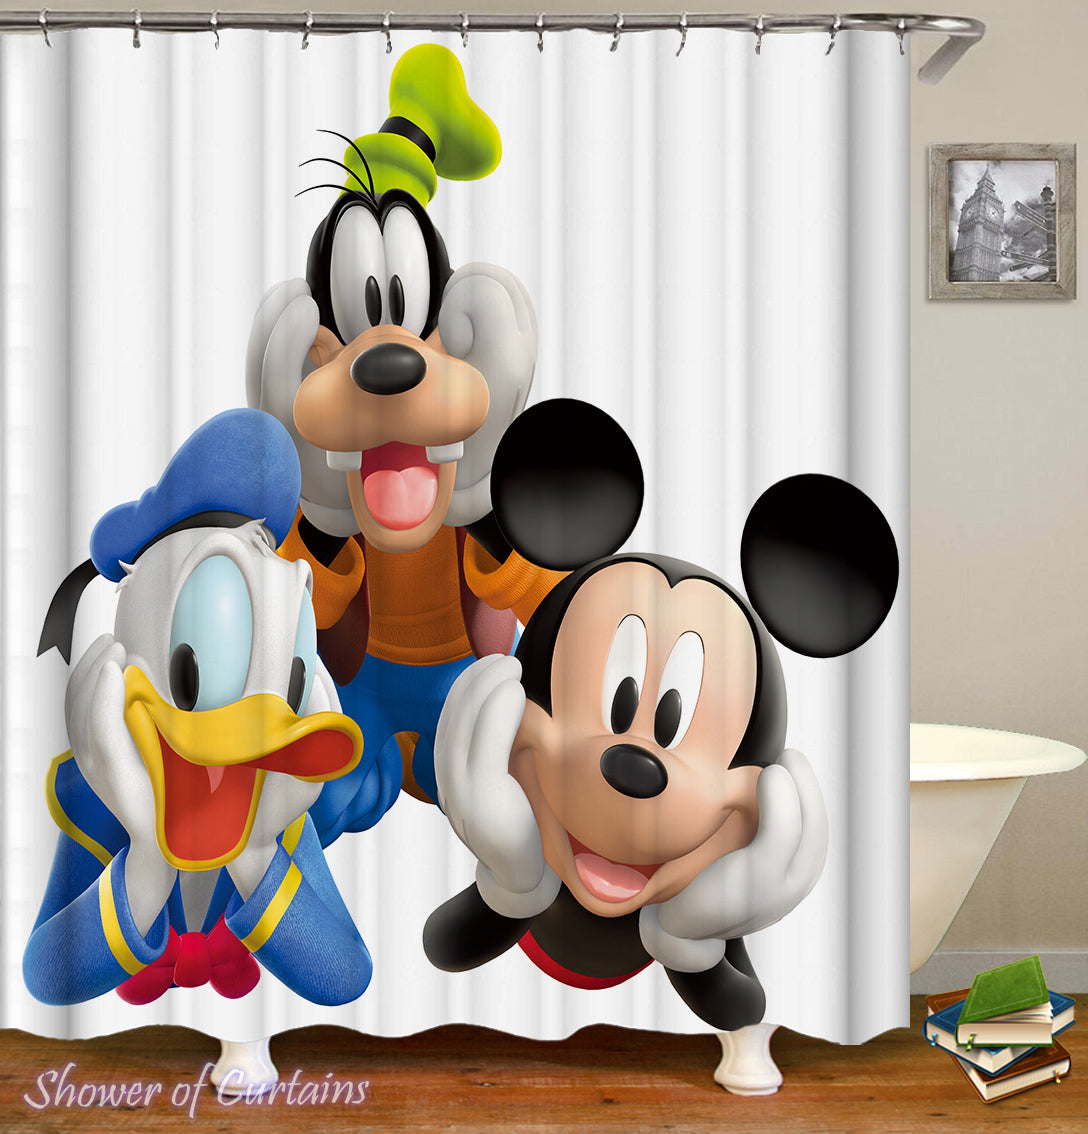 Mickey Mouse And Friends Shower Of Curtains Reviews On Judgeme